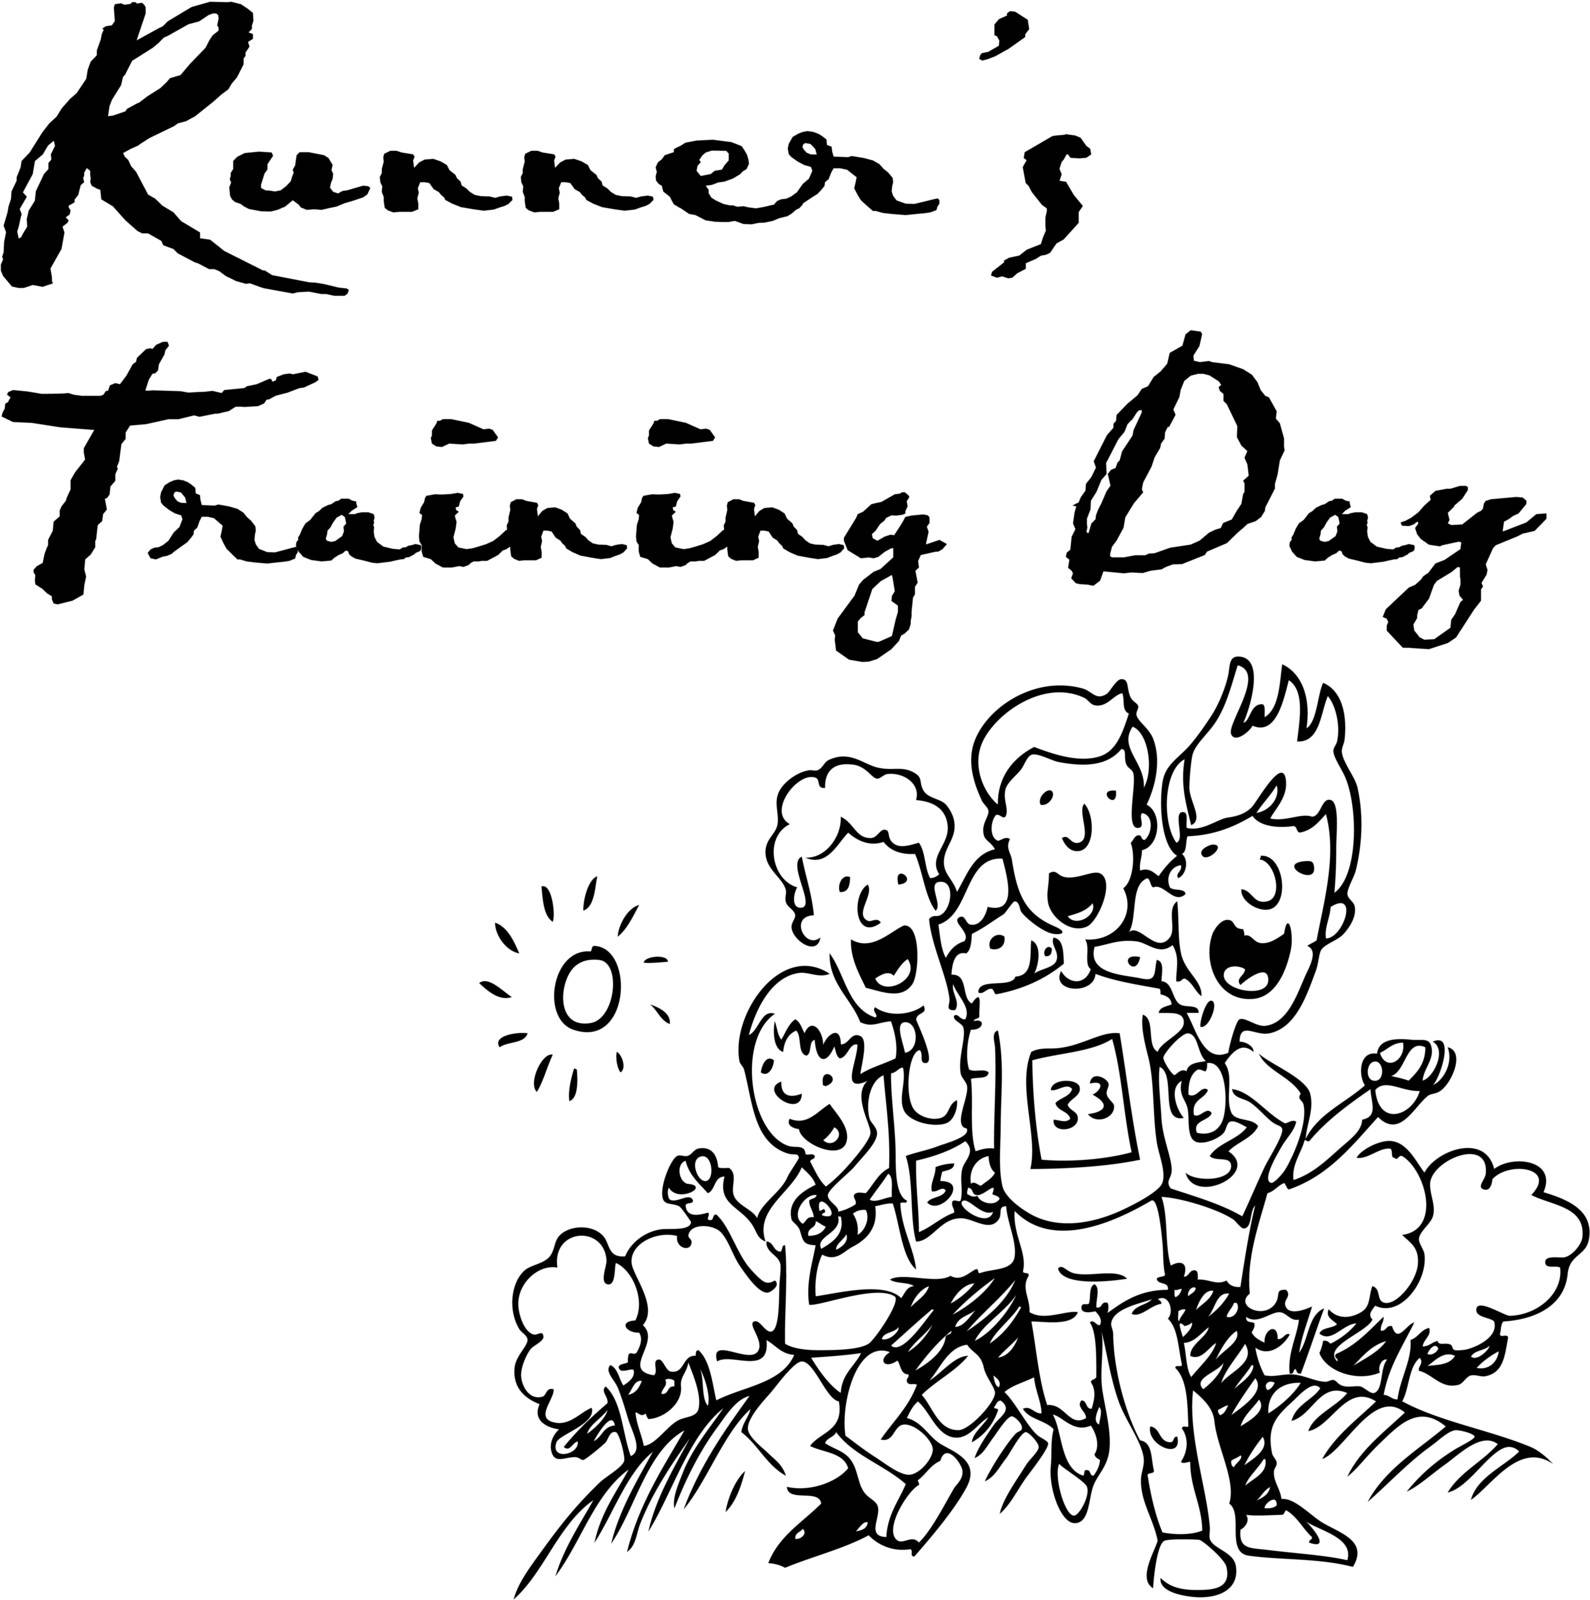 Runners Training Day by cteconsulting